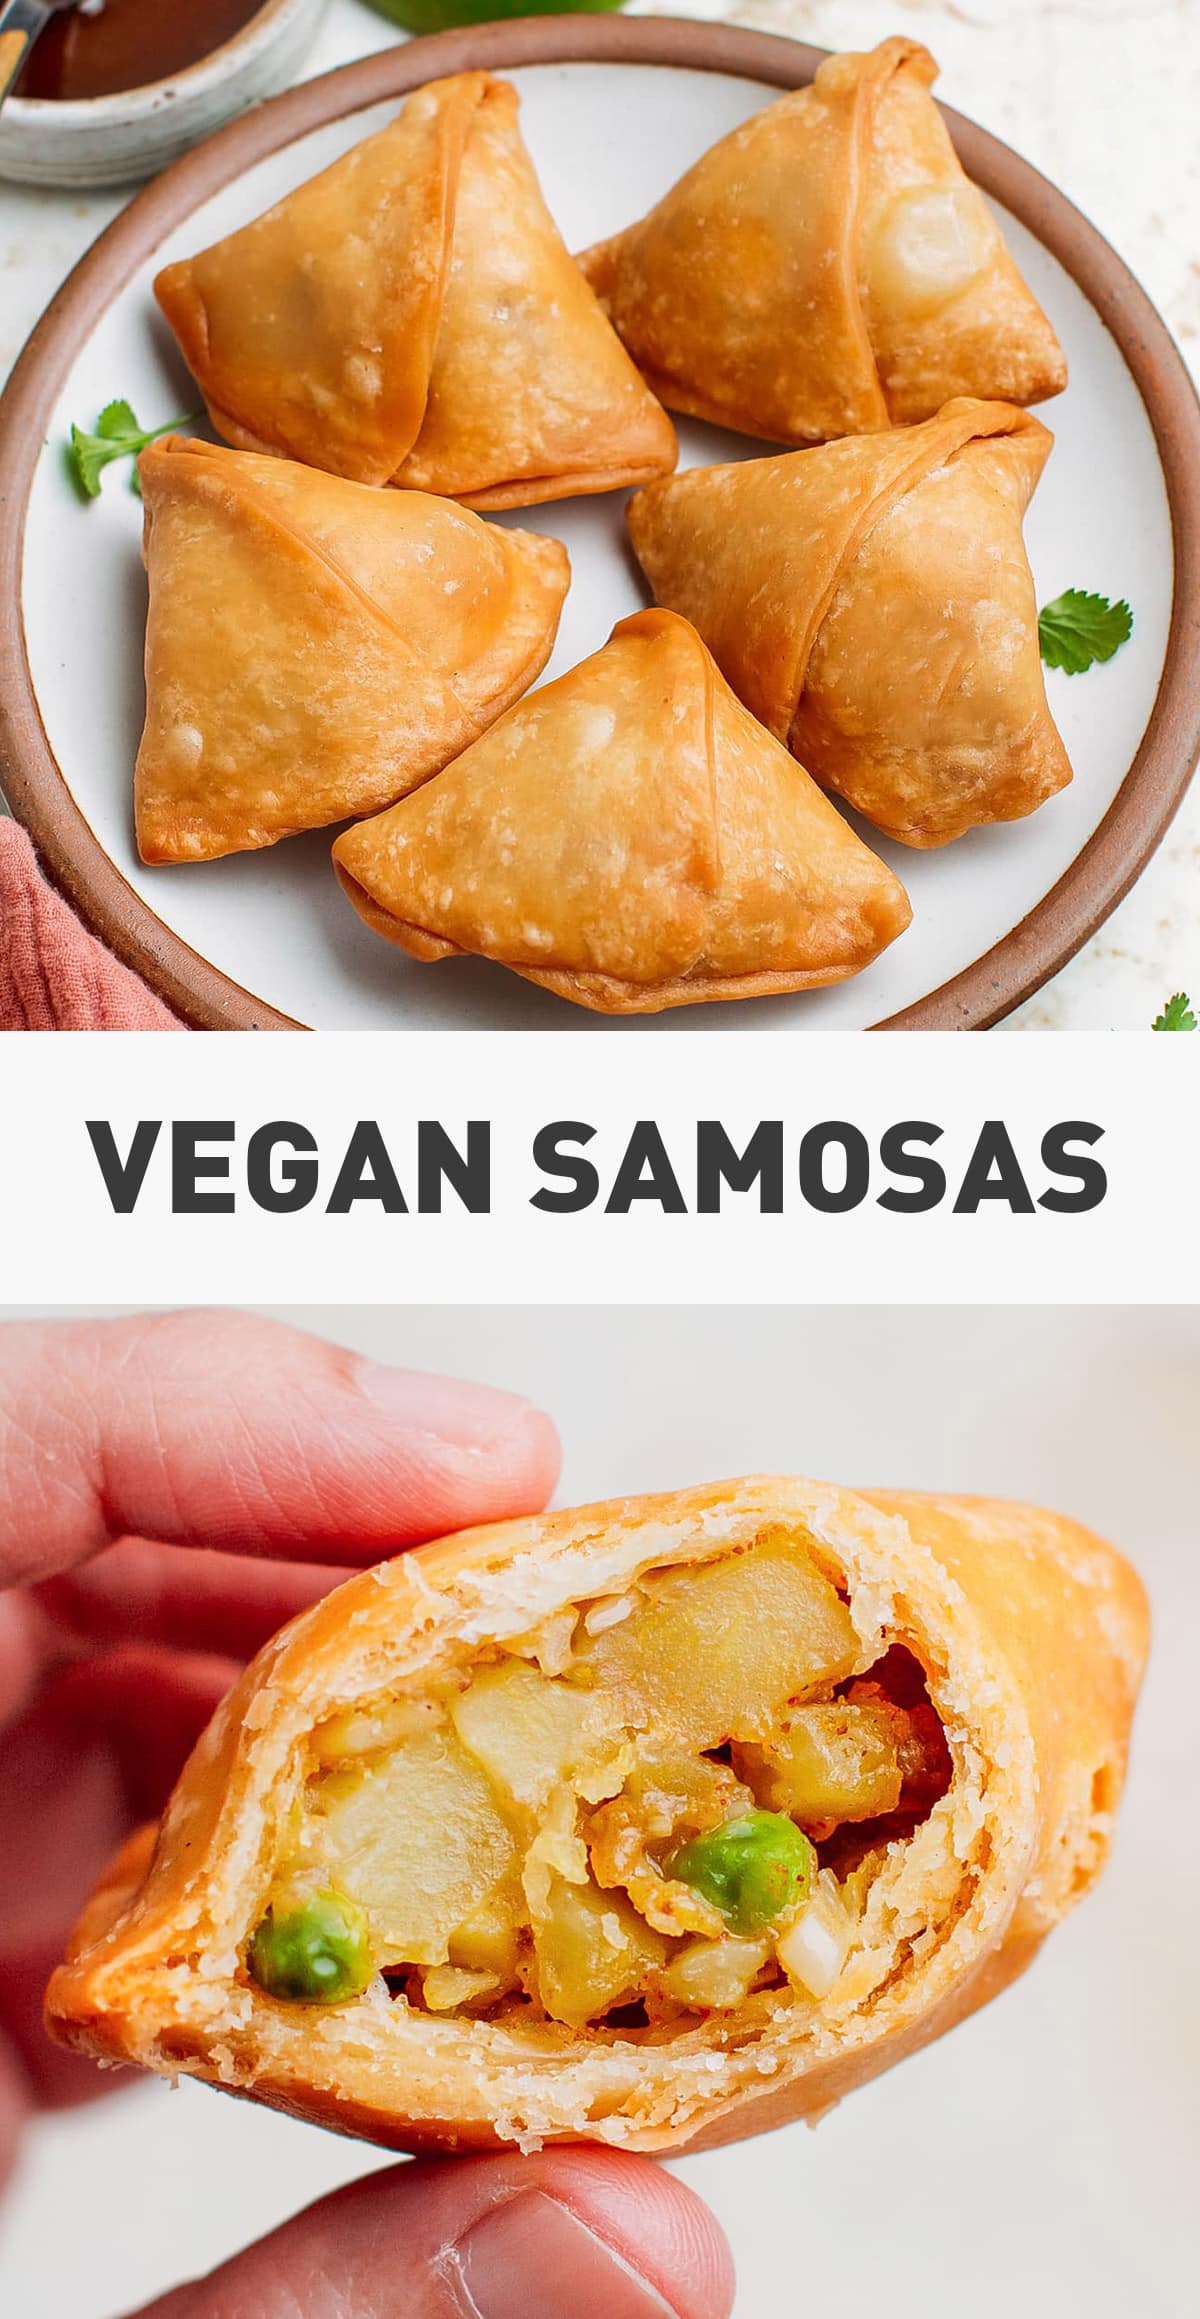 Learn how to make vegan samosas from scratch! This Indian-inspired appetizer features a tender potato filling infused with plenty of spices and enclosed in a crispy homemade pastry shell. Serve with tamarind chutney or a mint dipping sauce for a tasty plant-based appetizer! #indianfood #veganrecipes